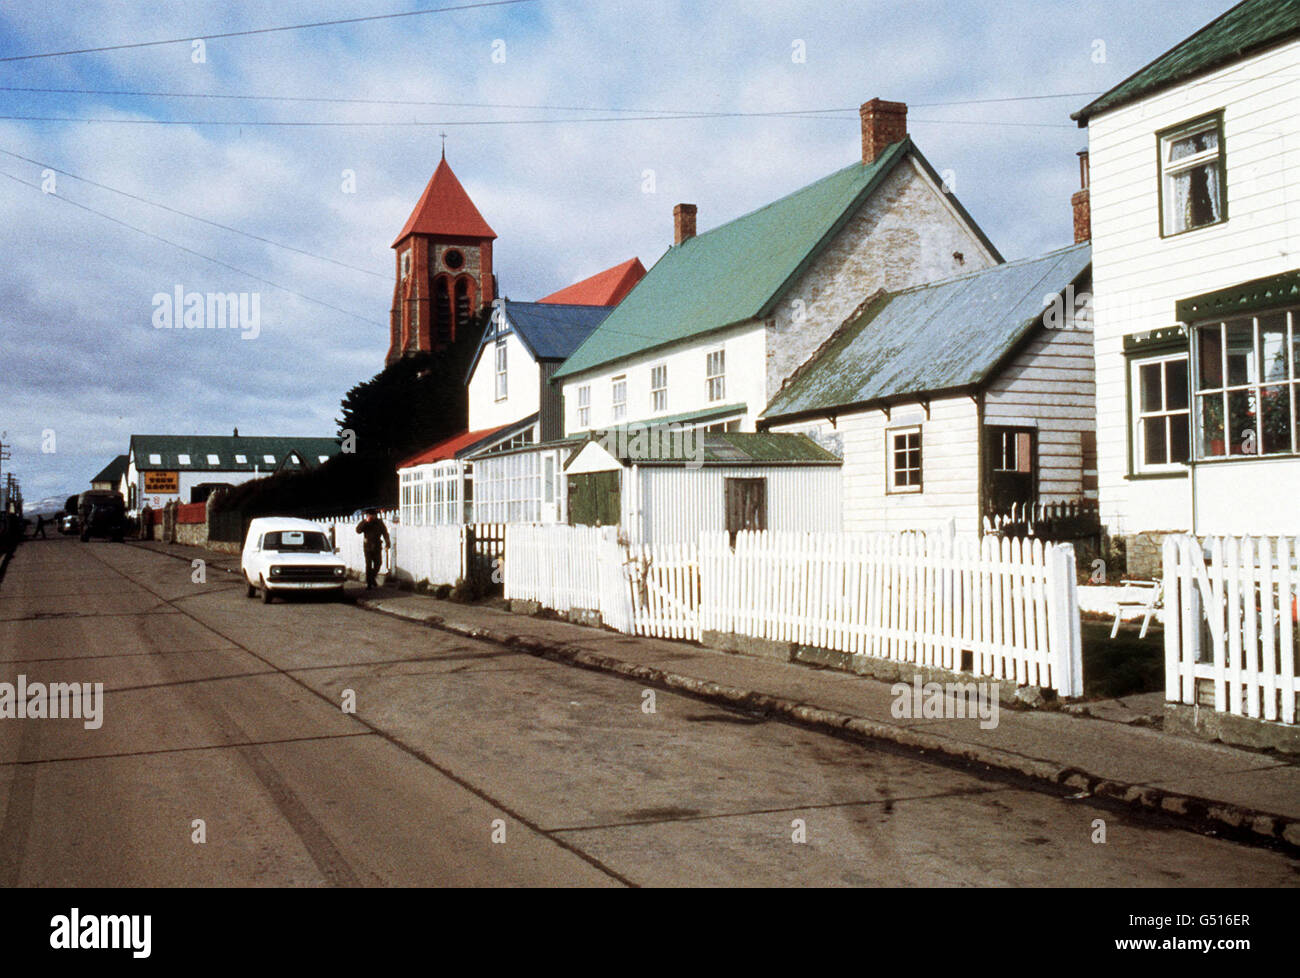 Port Stanley waterfront, with the Cathedral in the background, in the Falkland Islands. Stock Photo